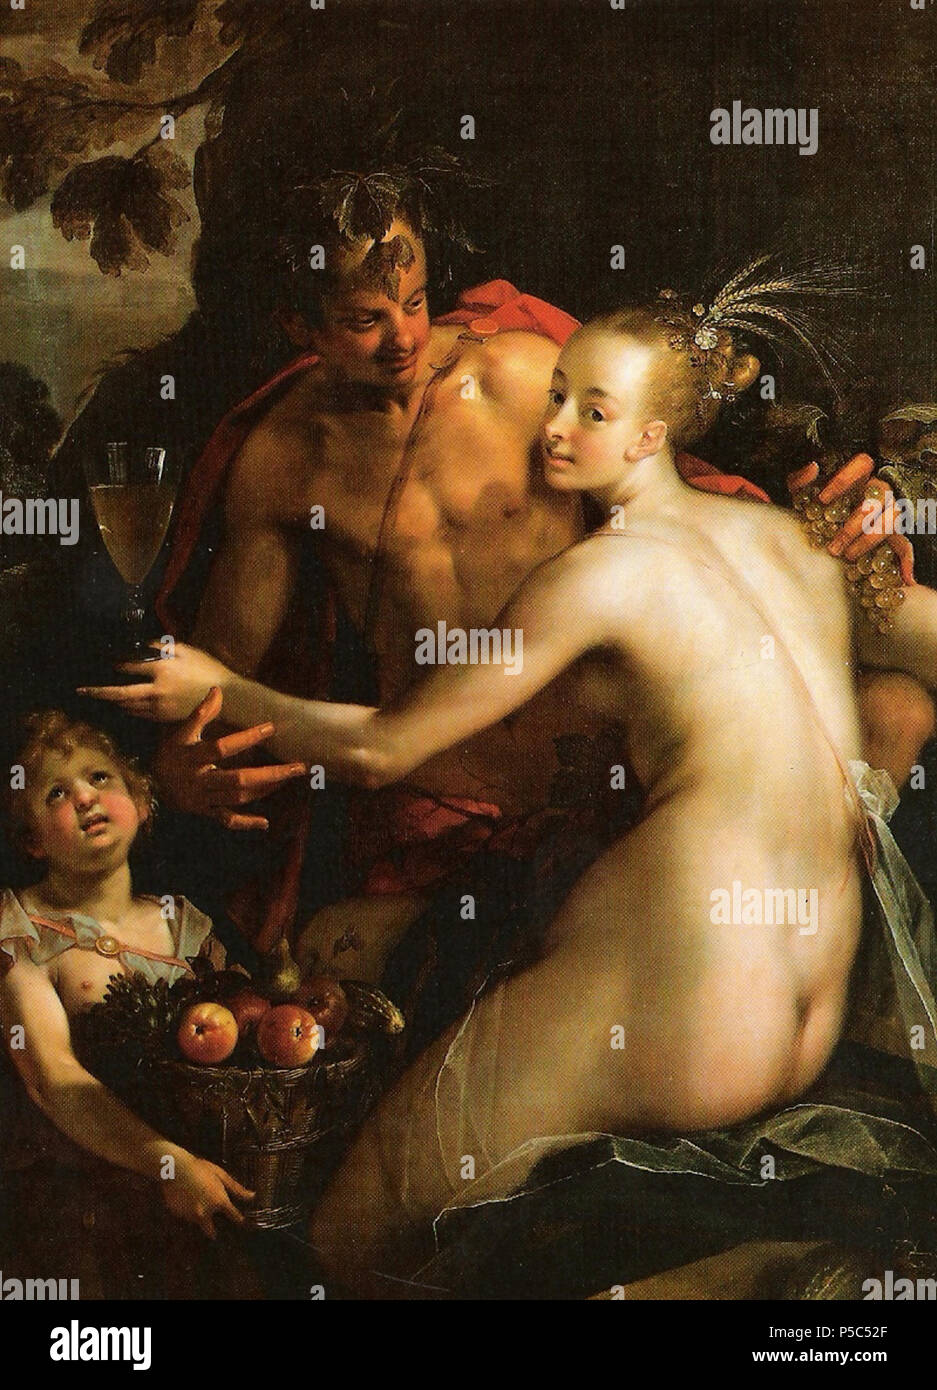 English: Bacchus, Ceres and Cupid  circa 1600. N/A 160 Bacchus, Ceres und Amor 1600 Stock Photo